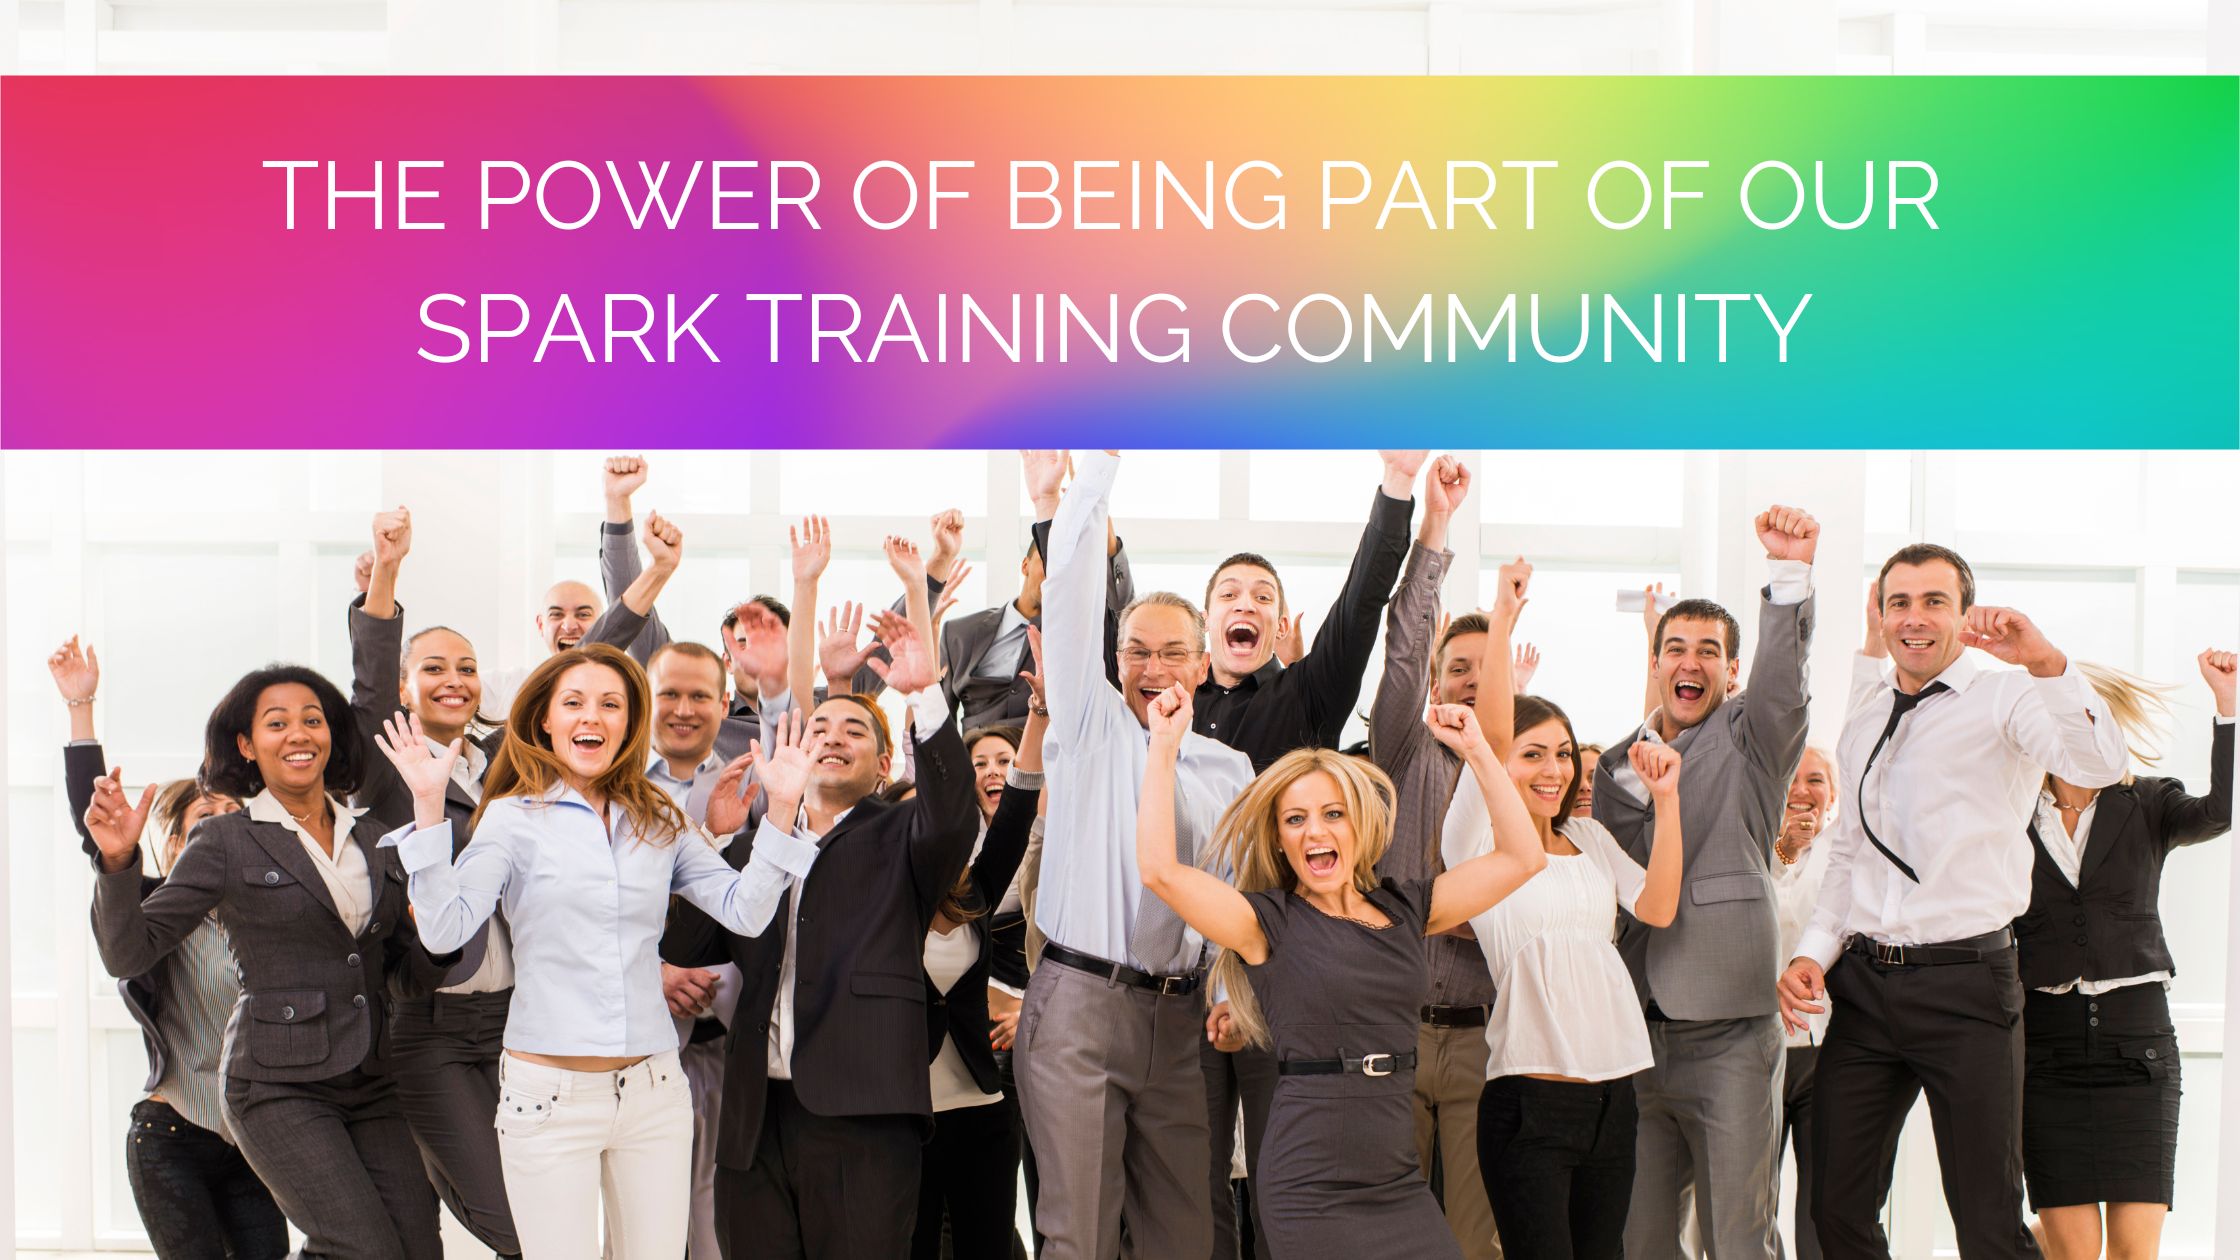 The Power of Being Part of Our SPARK Training Community